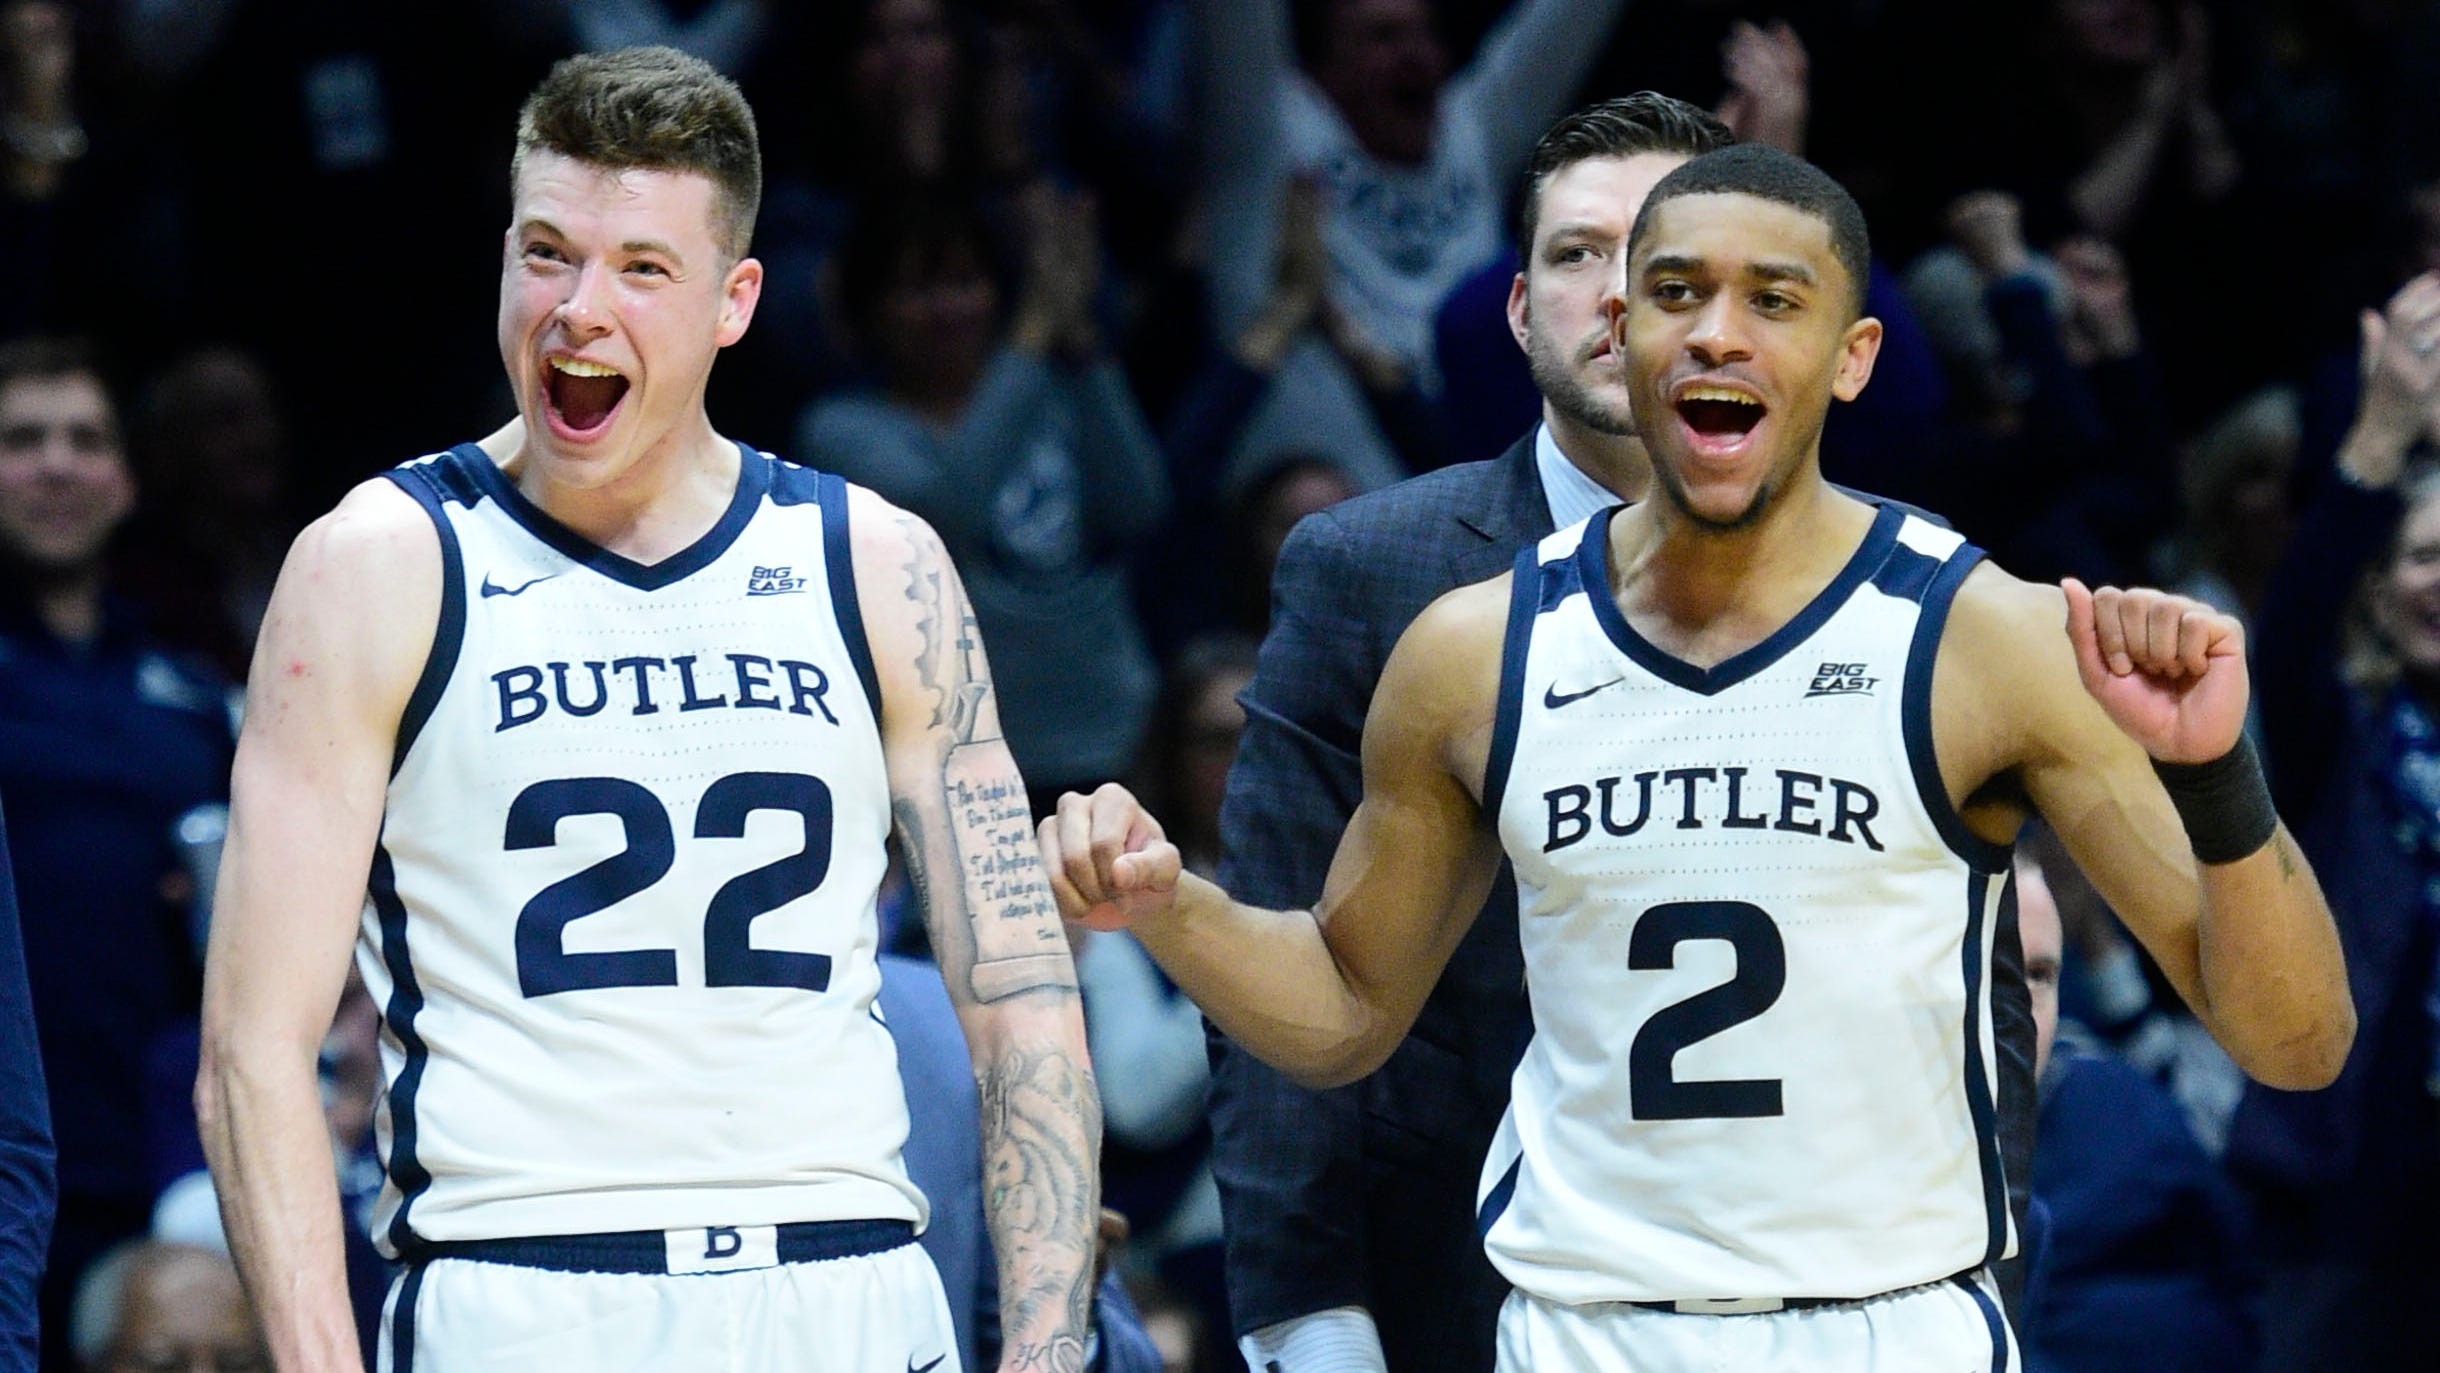 Butler basketball's practice players All guts, no glory. You won't see